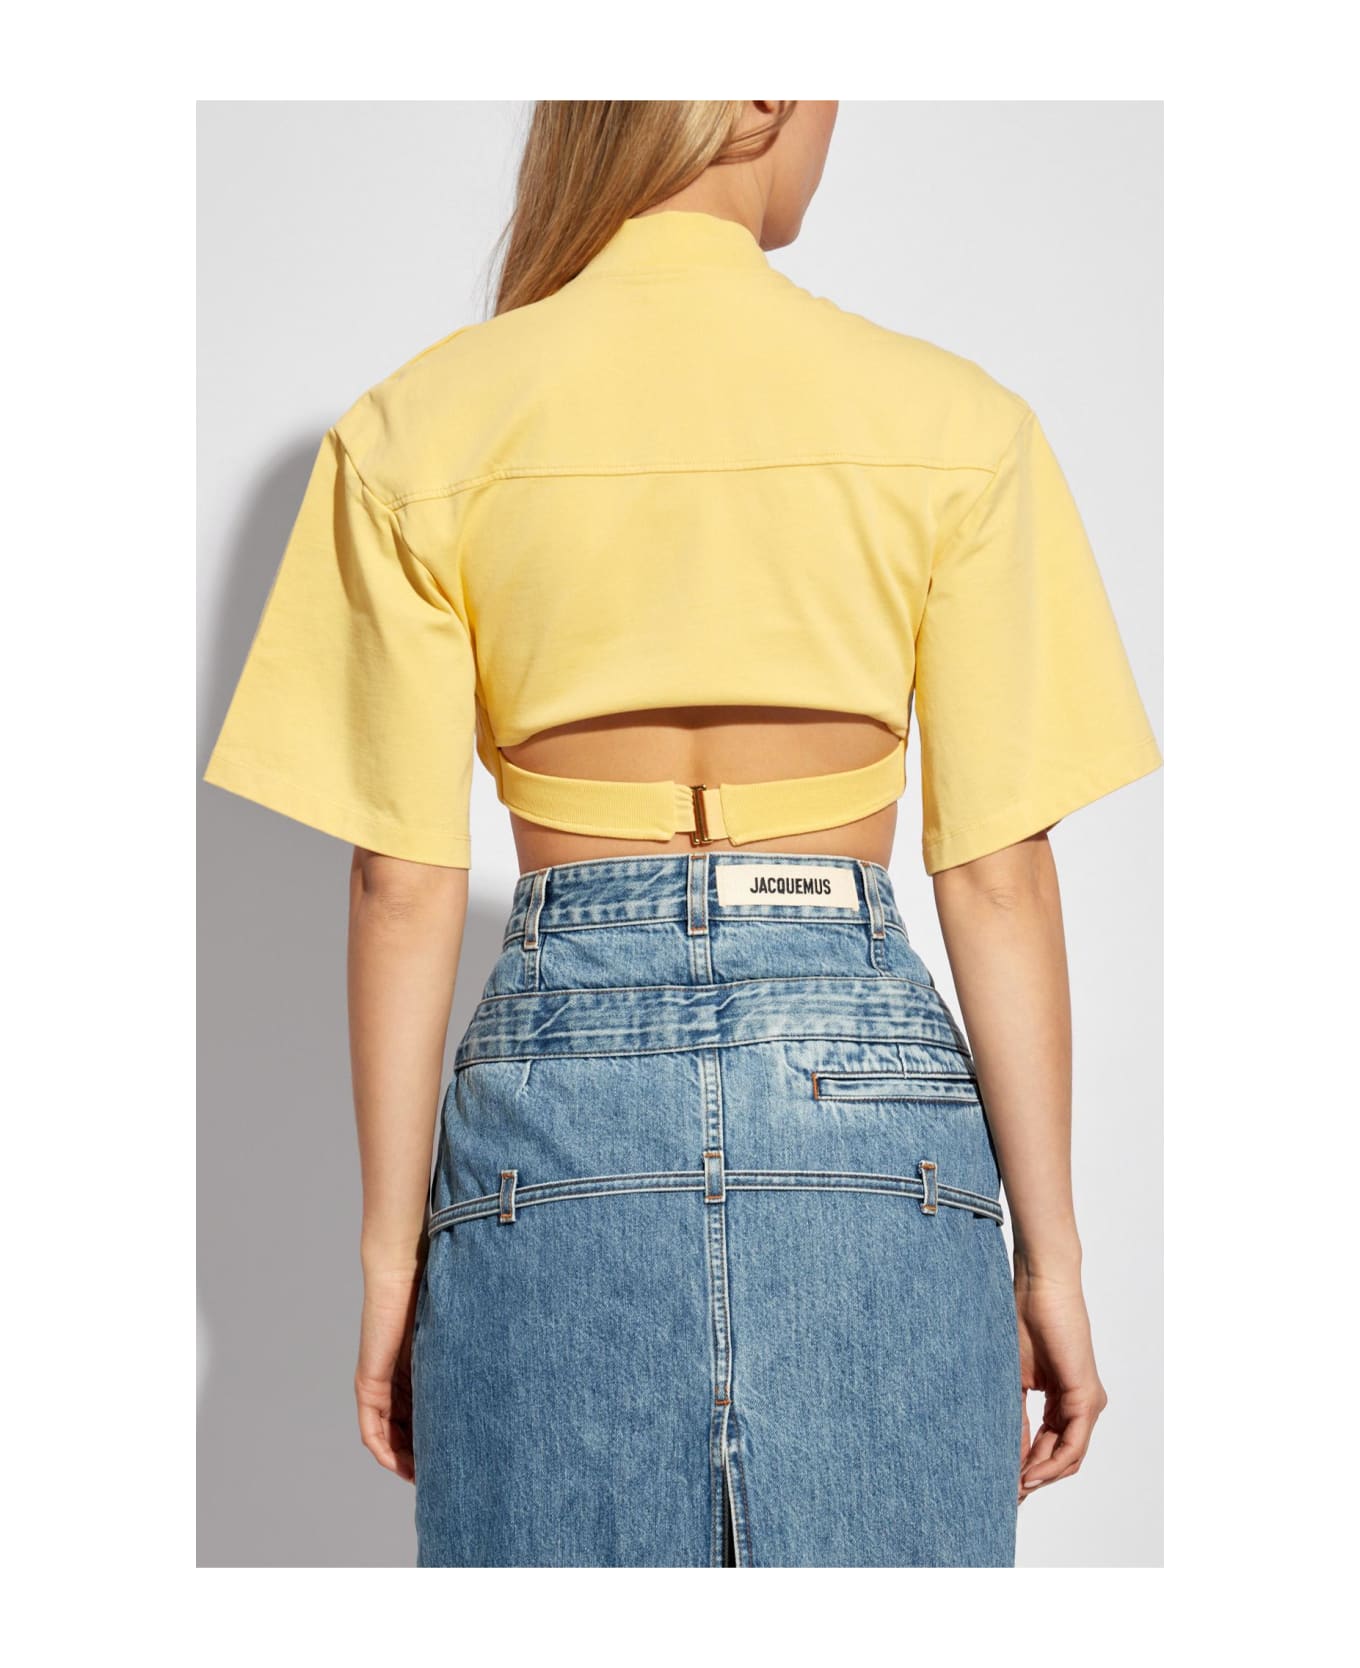 Jacquemus Cropped Top - YELLOW シャツ